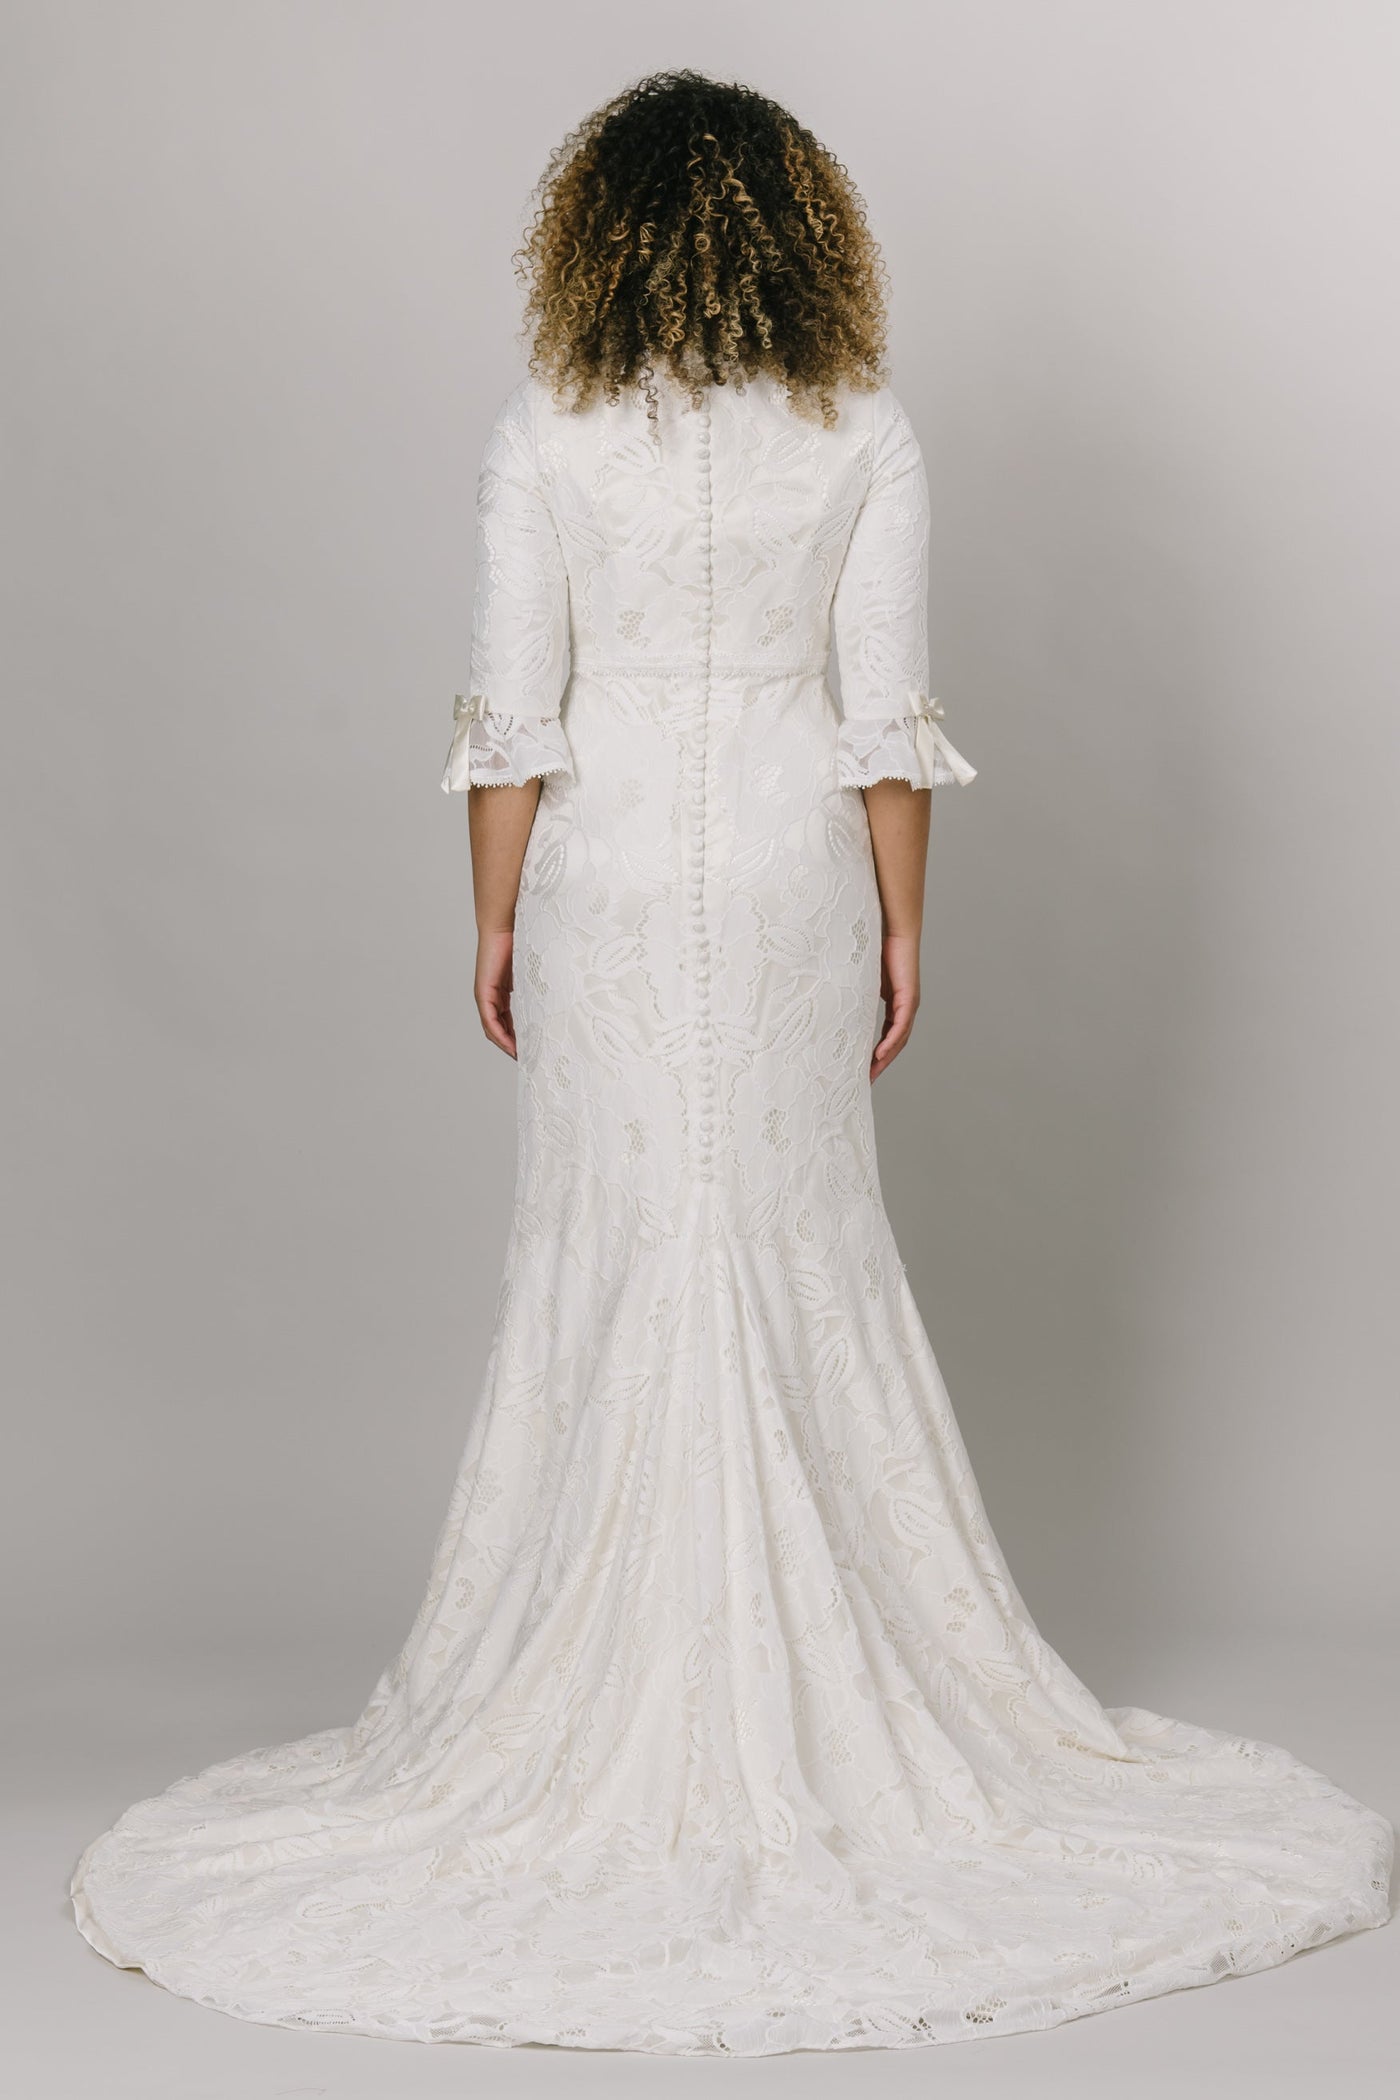 The back view of a modest wedding dress features all-over floral lace, in a fitted silhouette. The neckline has a dainty trim that matches the cute bell sleeve!